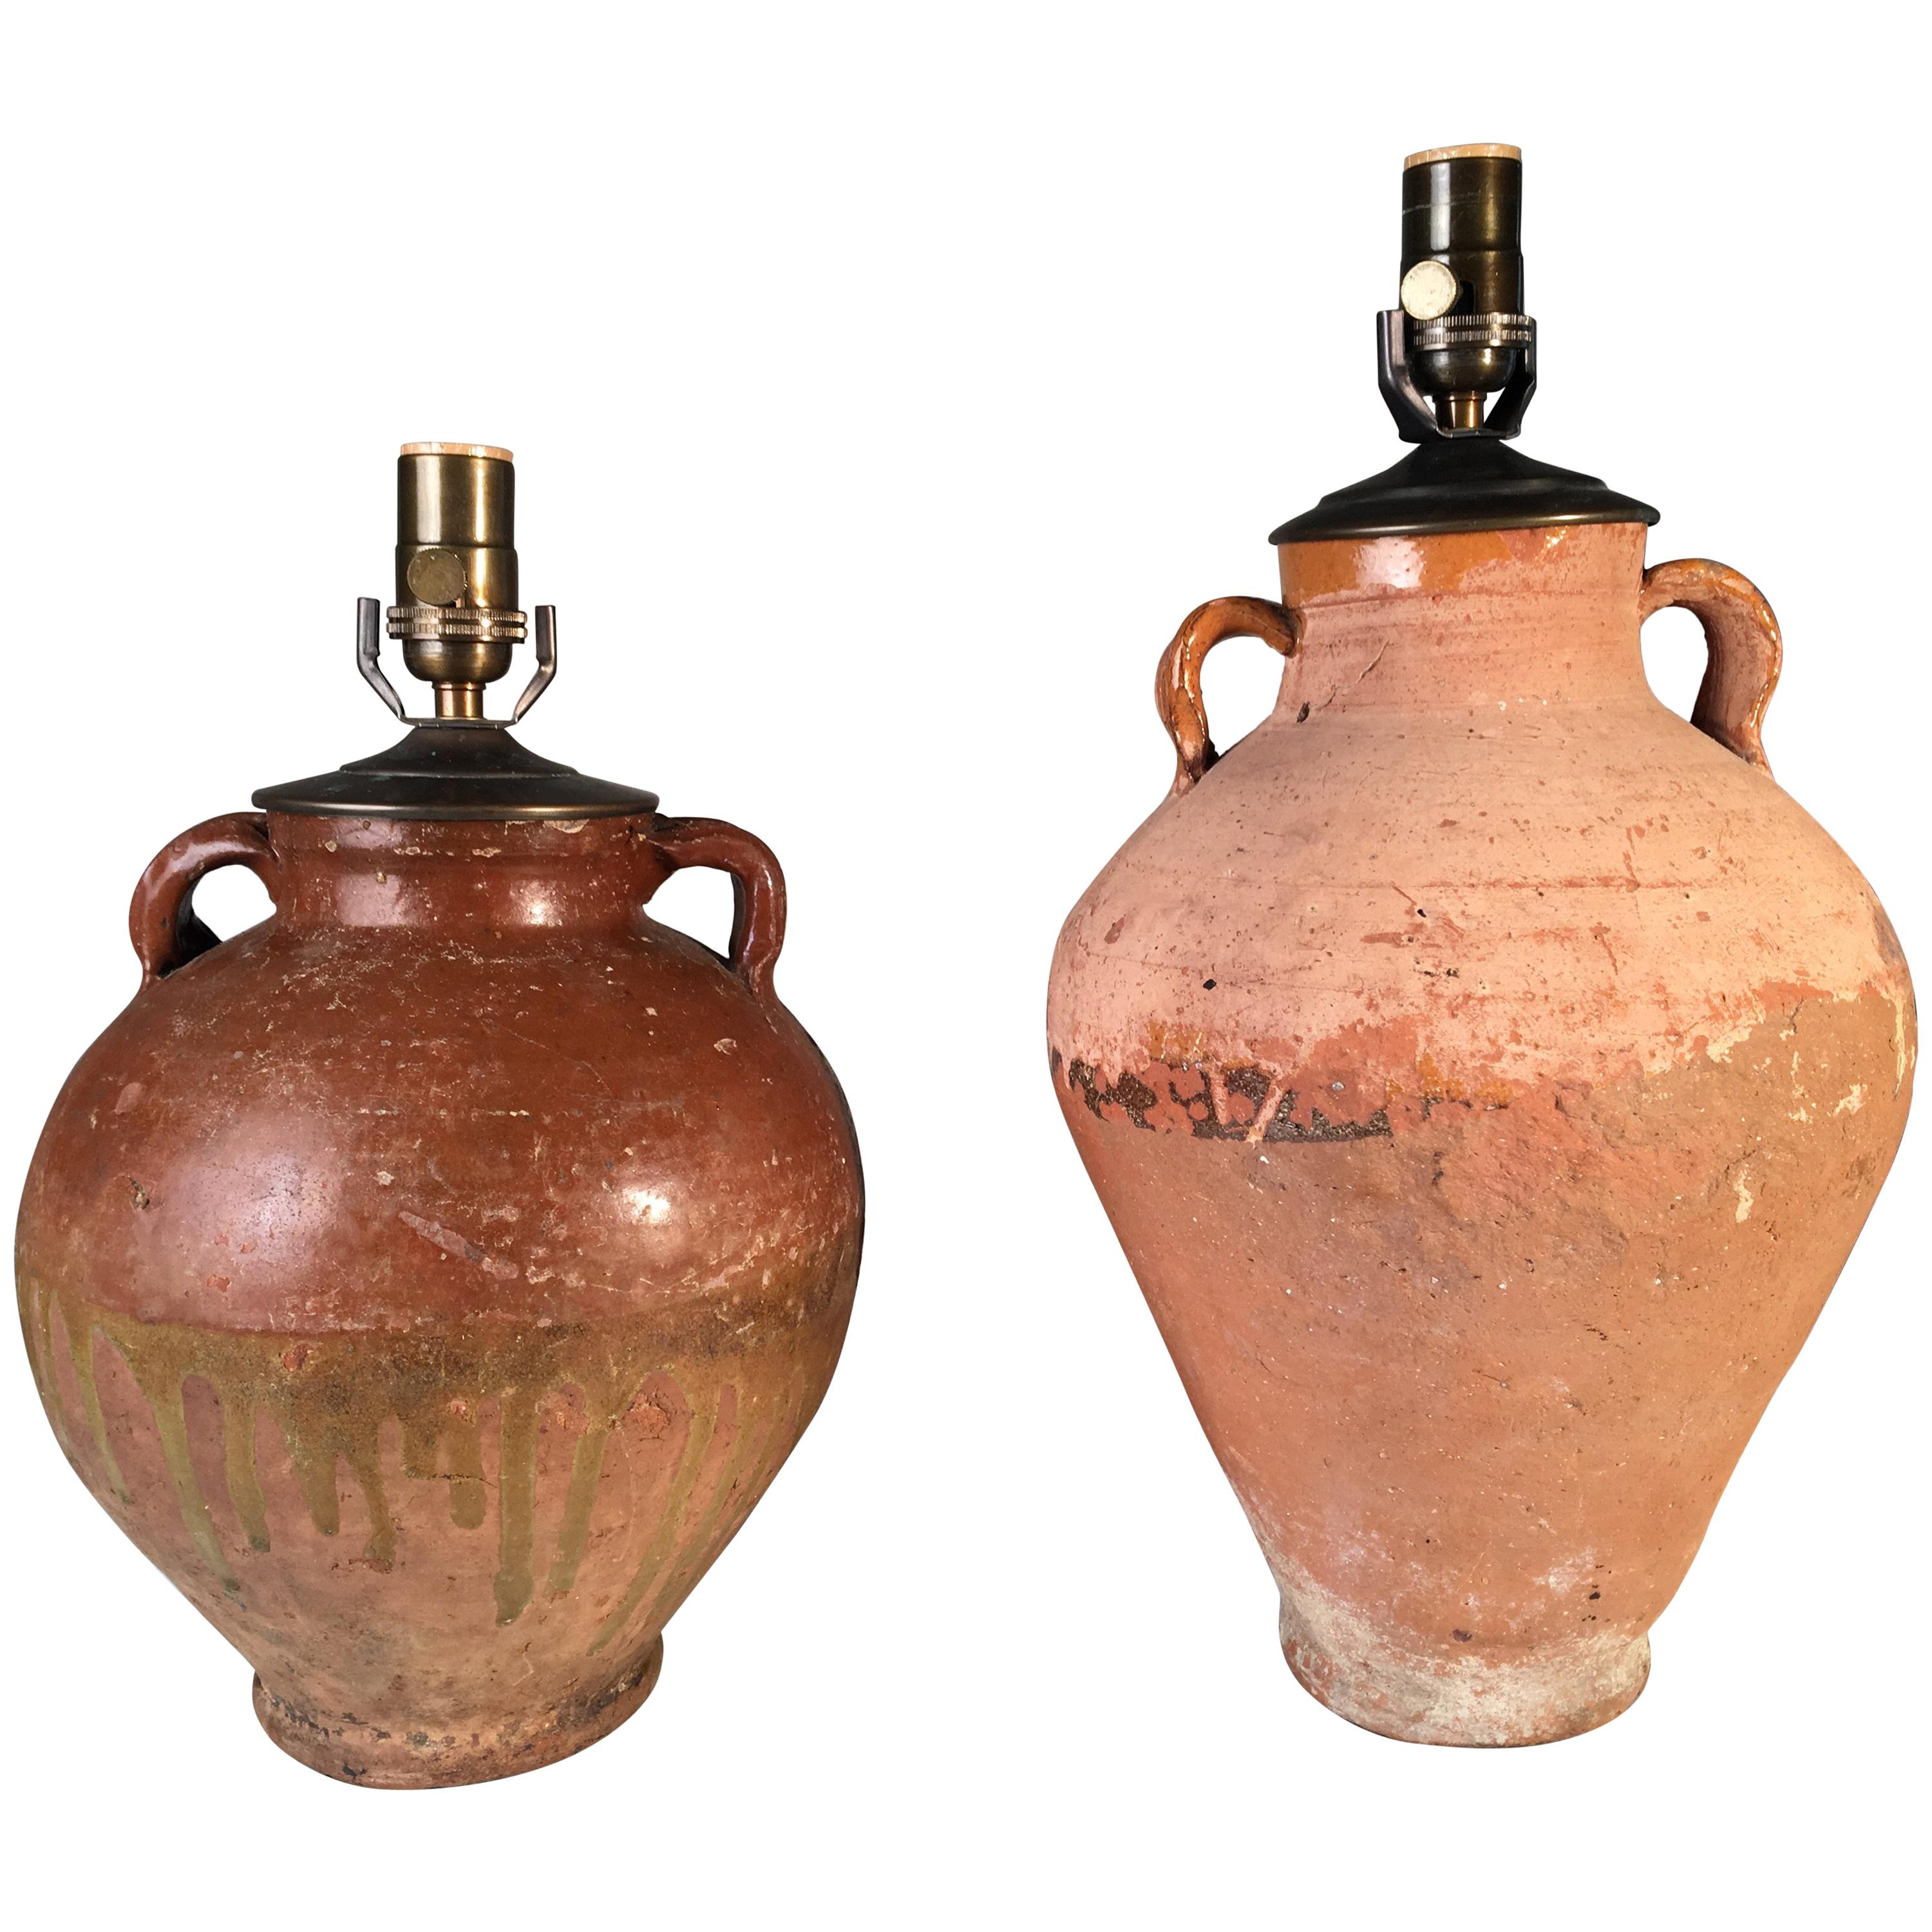 Two Antique Terracotta Jars as Table Lamps